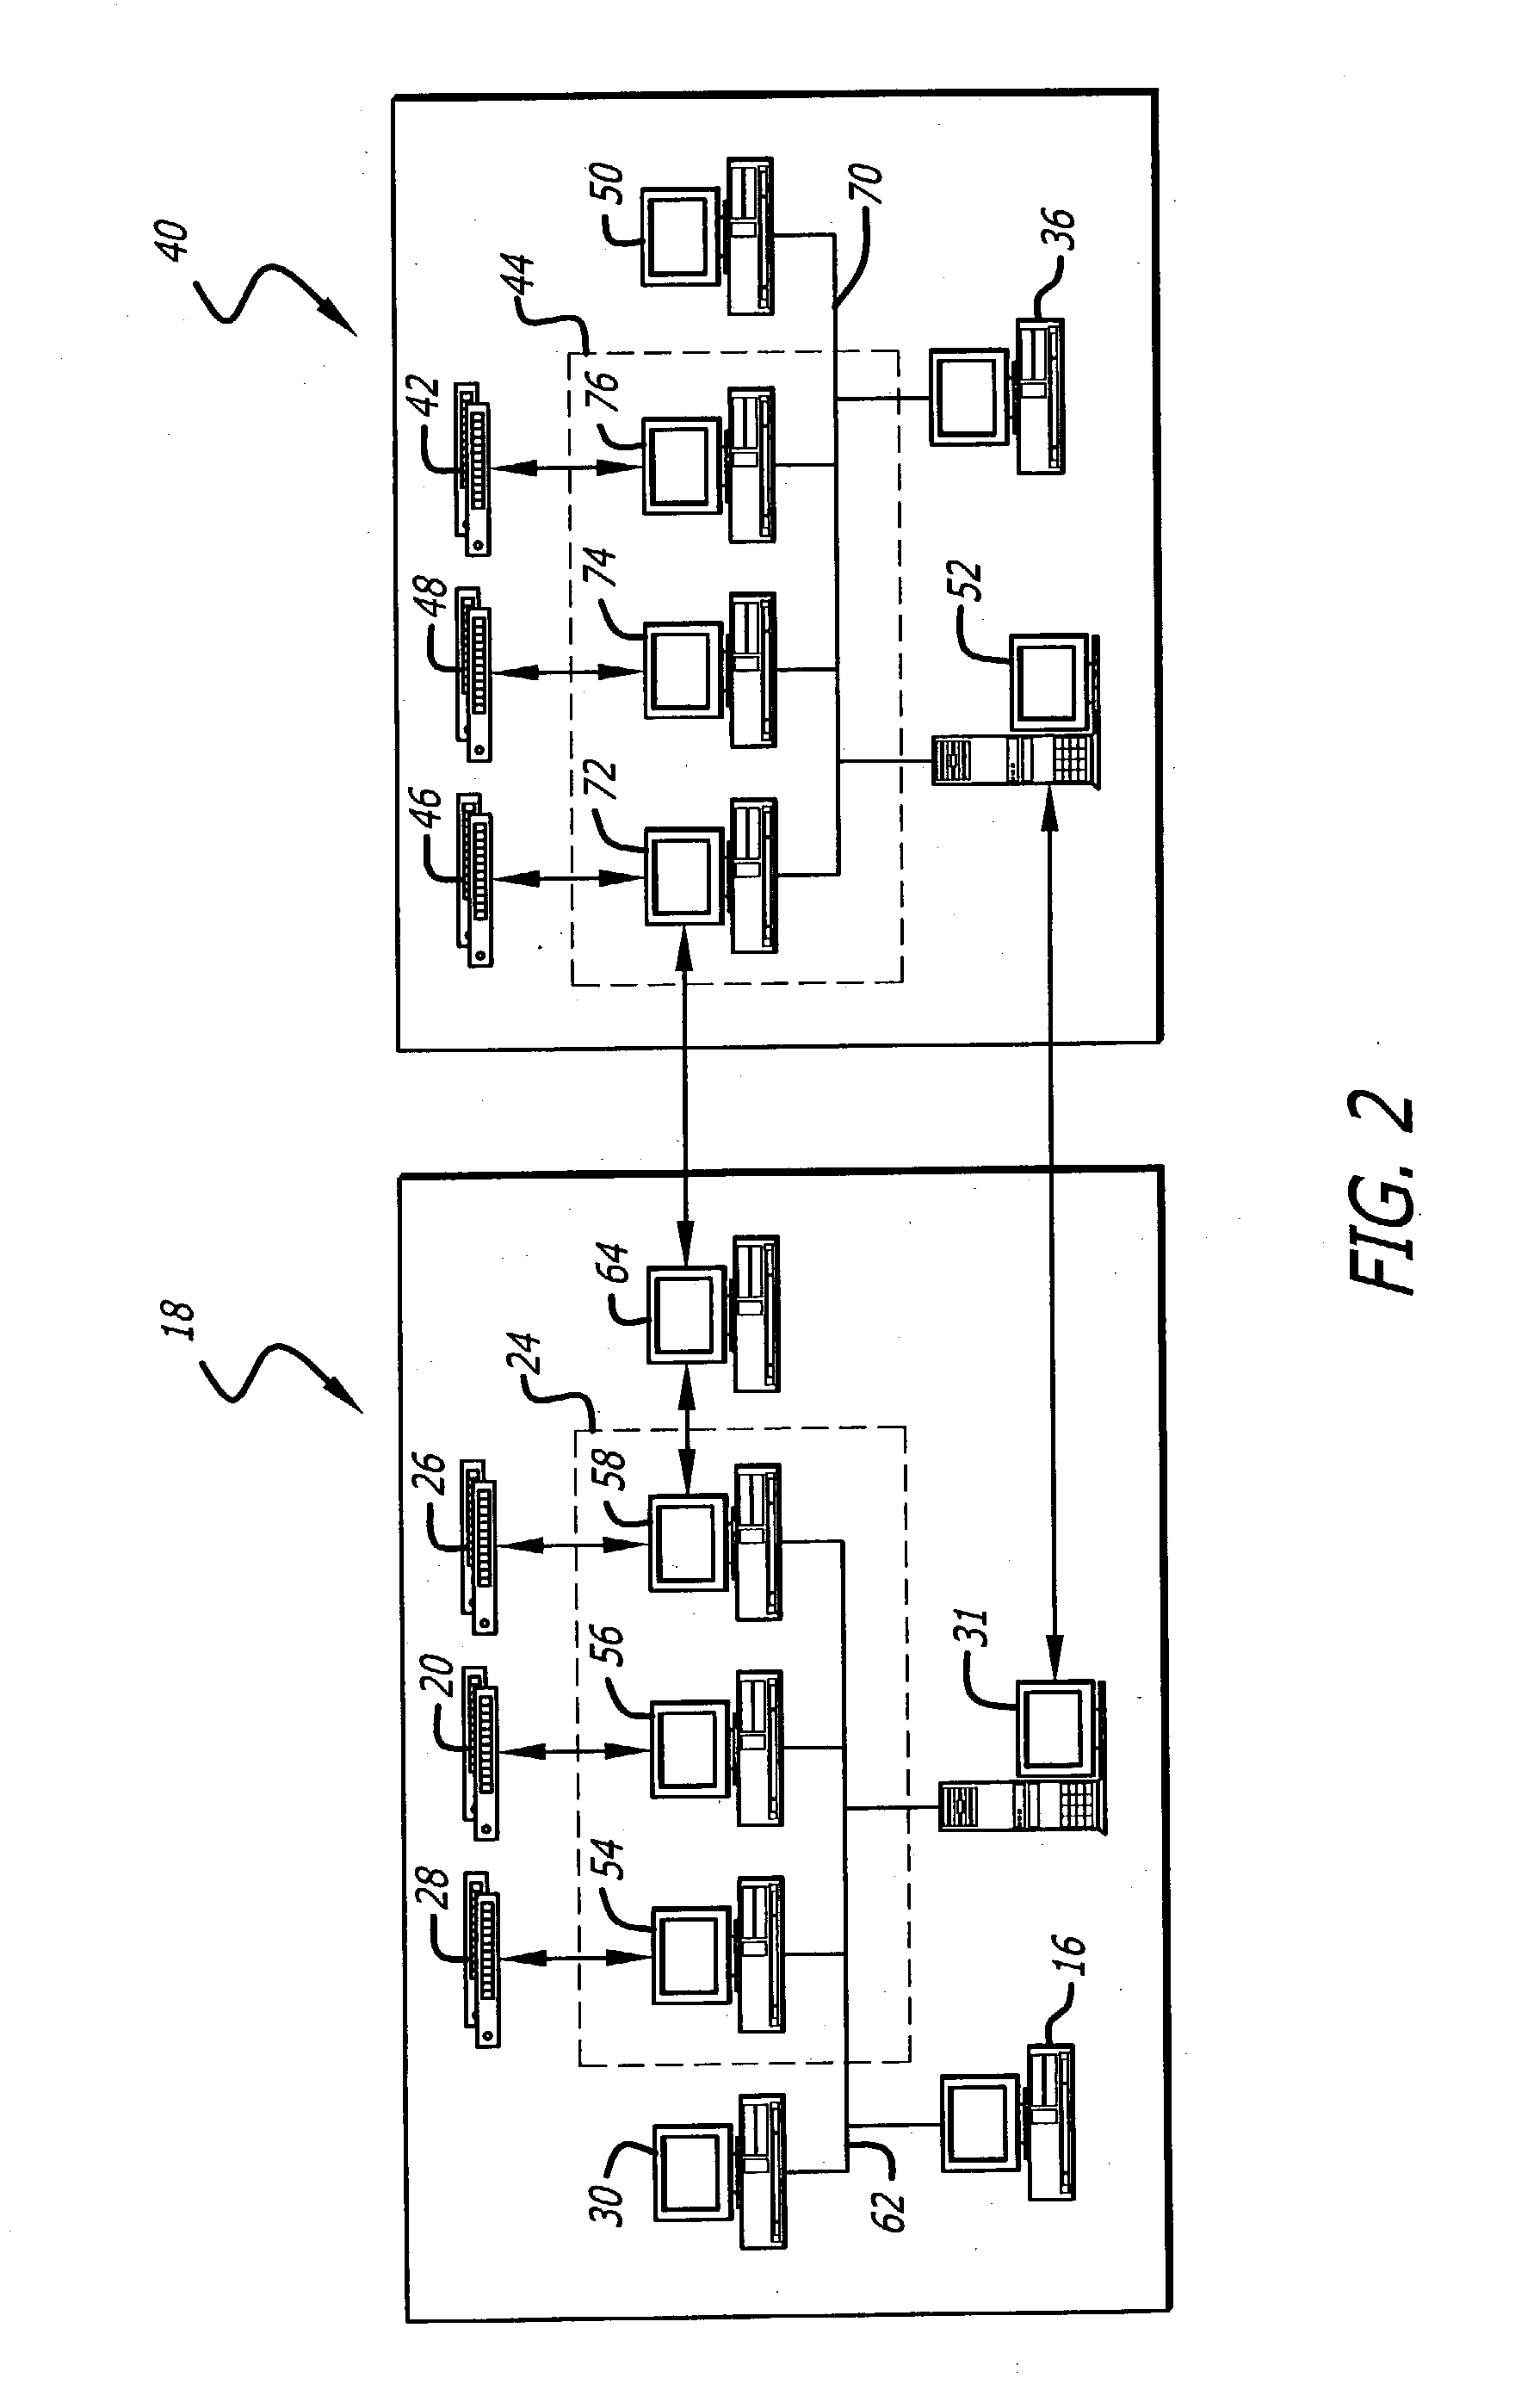 System for monitoring direct broadcast wireless signals